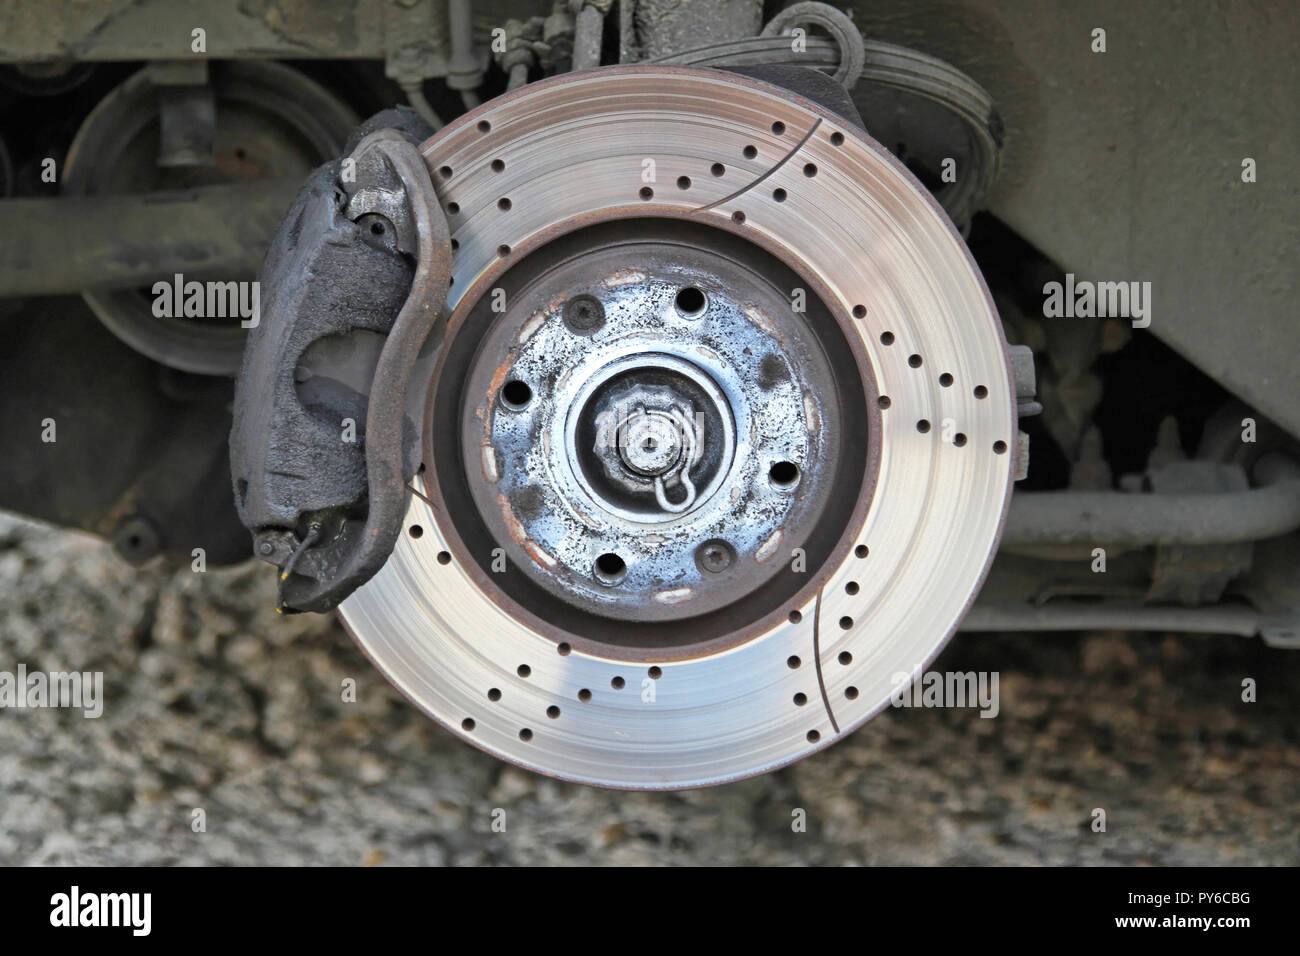 Ventilated disc brake with caliper and pads Stock Photo